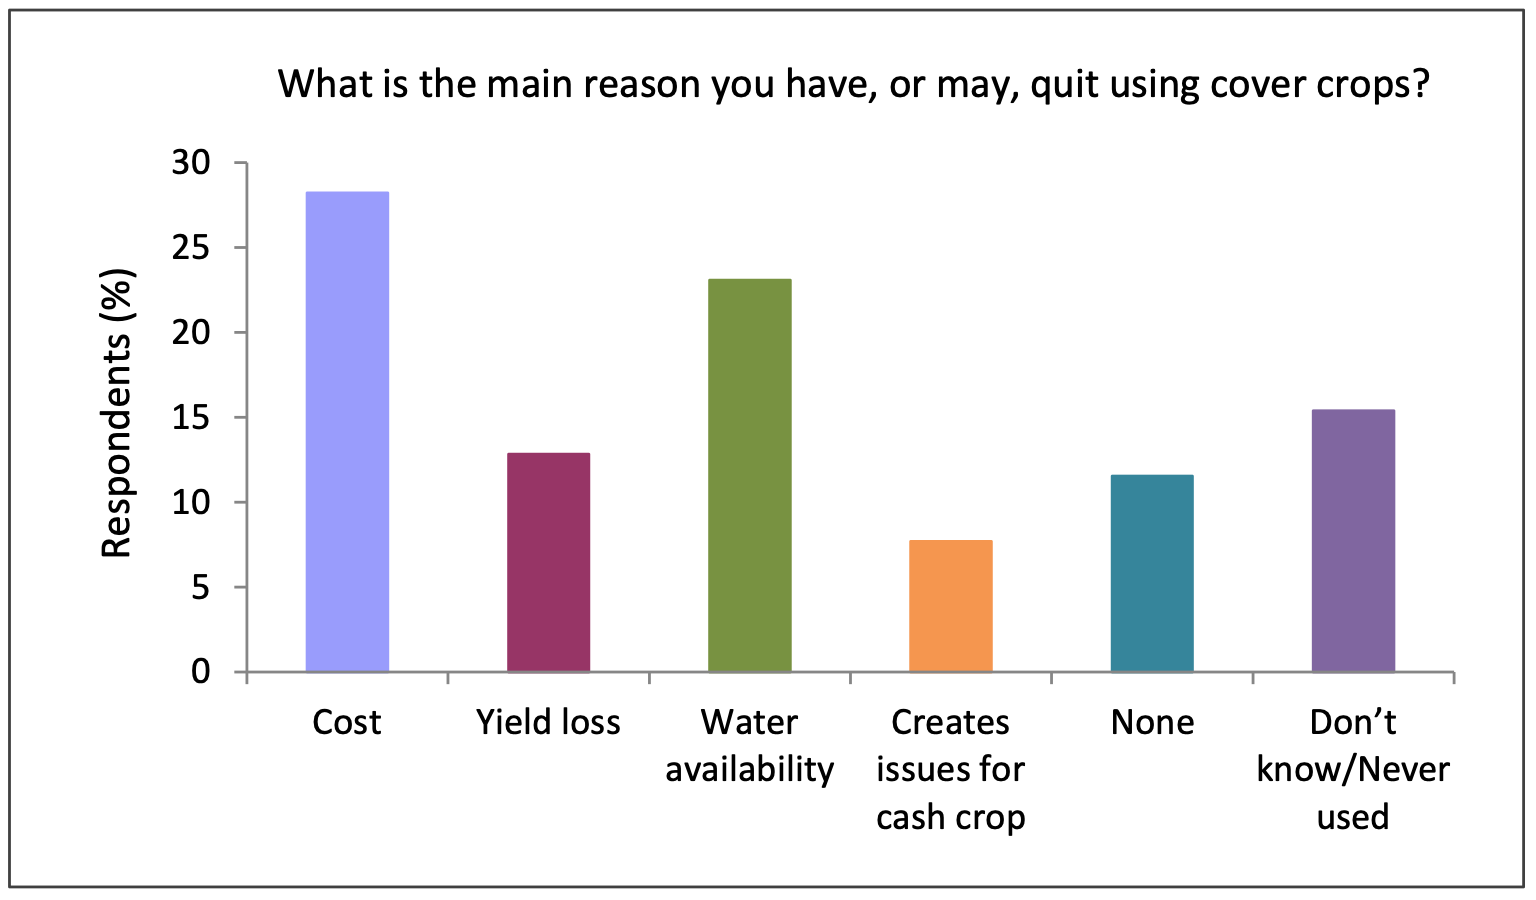 All respondents were asked to answer this question (hypothetical for non-cover crop growers) with short answer responses. Reasons listed for quitting use of cover crops by 5% or fewer of the respondents include unfamiliar with them or lack of knowledge, lack of equipment, lack of time, difficulty with cover crop, crop insurance, and soil disturbance. N=98